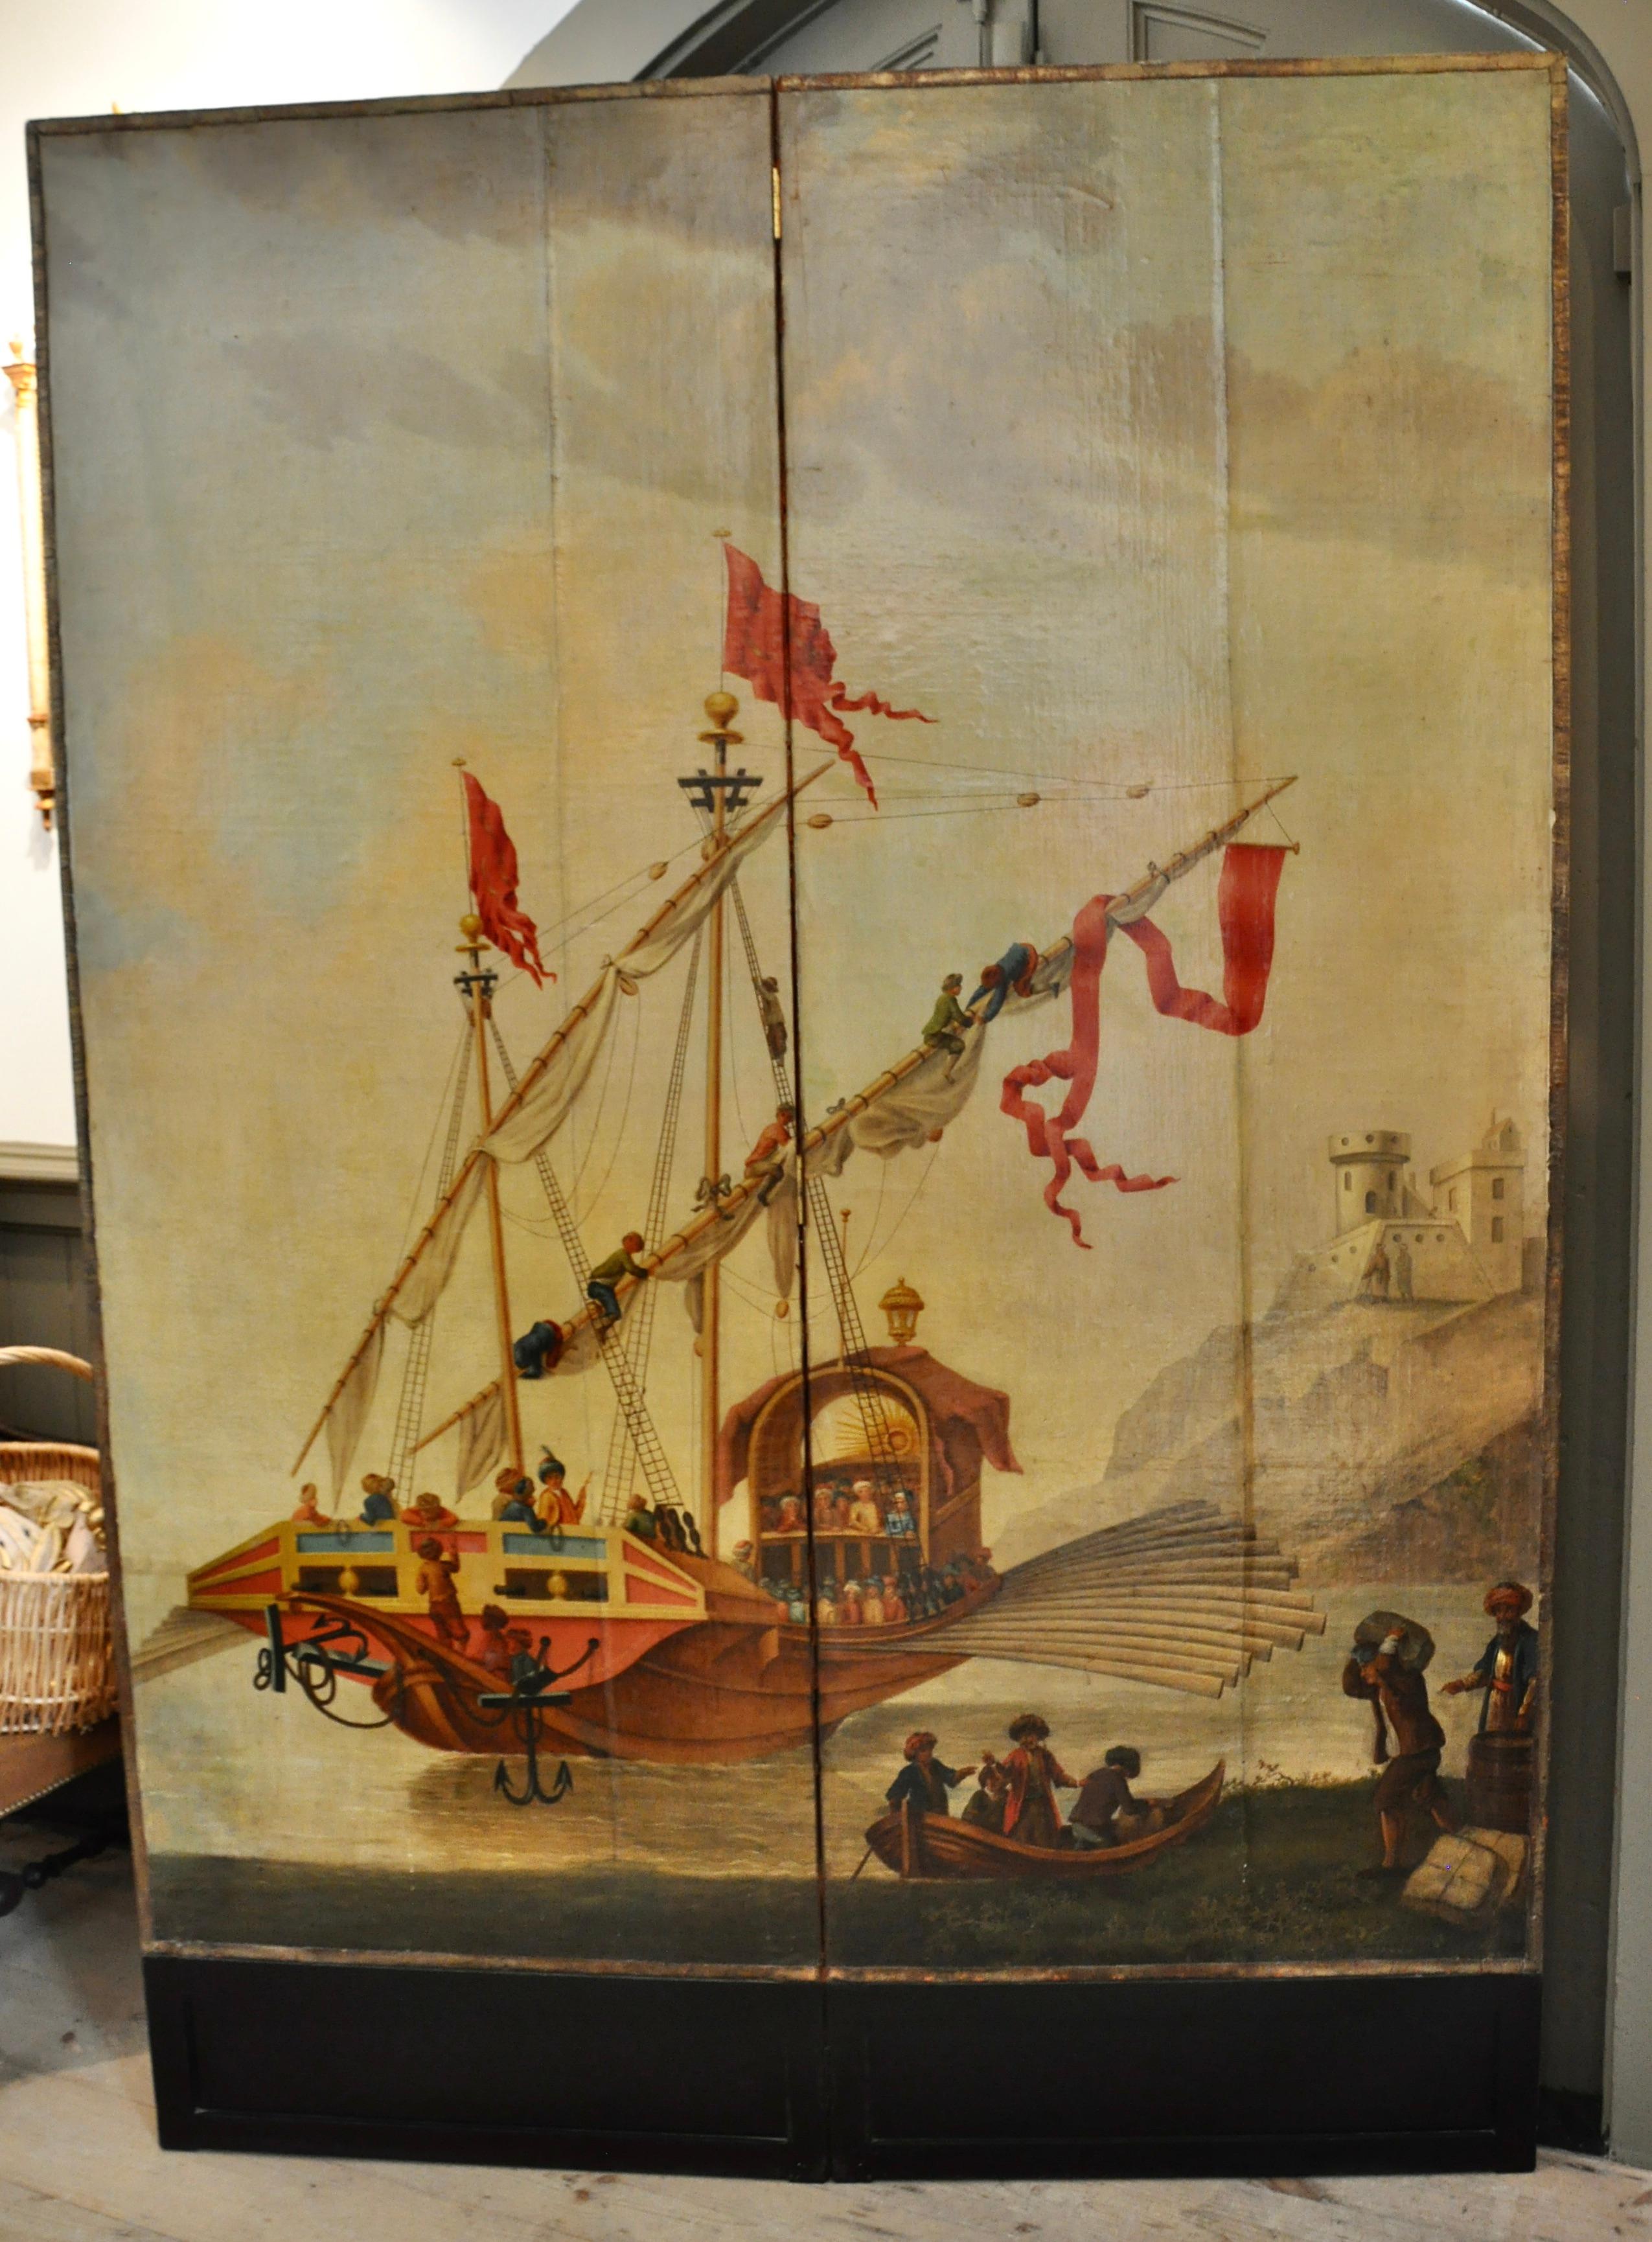 19th century two-panel room divider or screen. Showing Turkish sailing ship with sailors. Full sail and beautiful oared and masted vessel. Large scale. Fresh and narrative. Good colors. Oil on canvas or leather. Remarkably good condition.